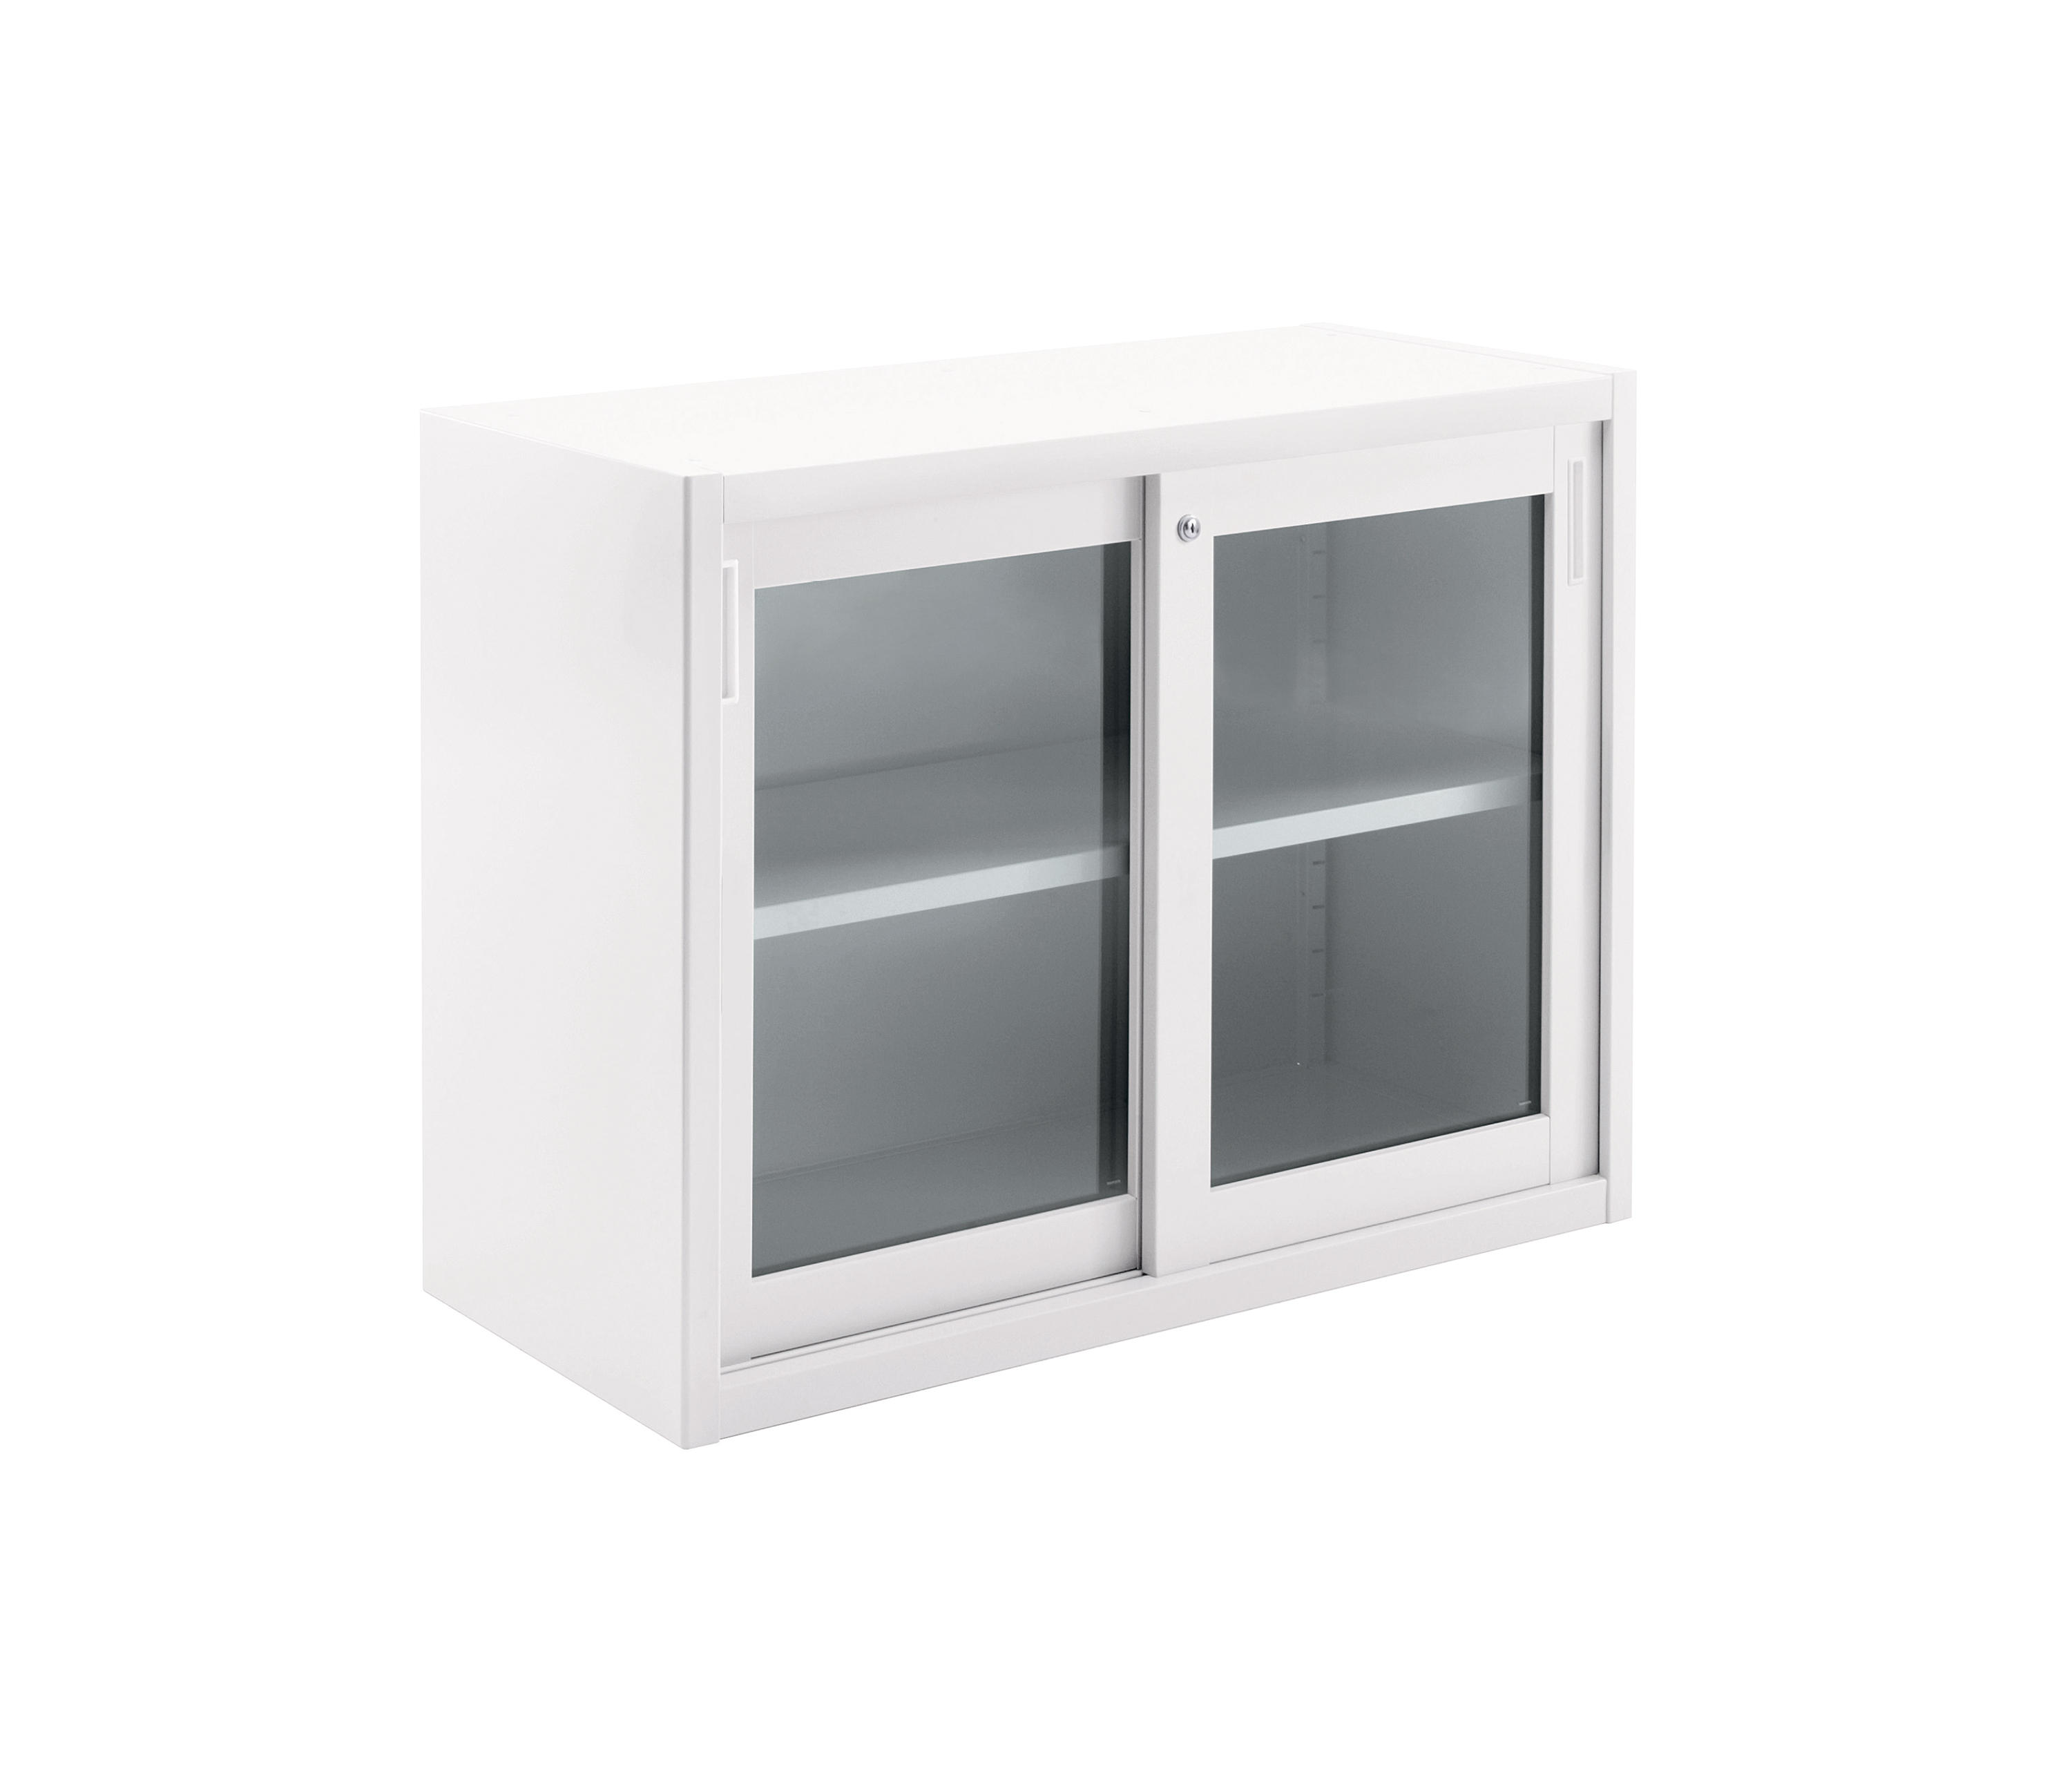 Tempered Glass Sliding Door Cabinet W 1200 H 880 Mm Architonic